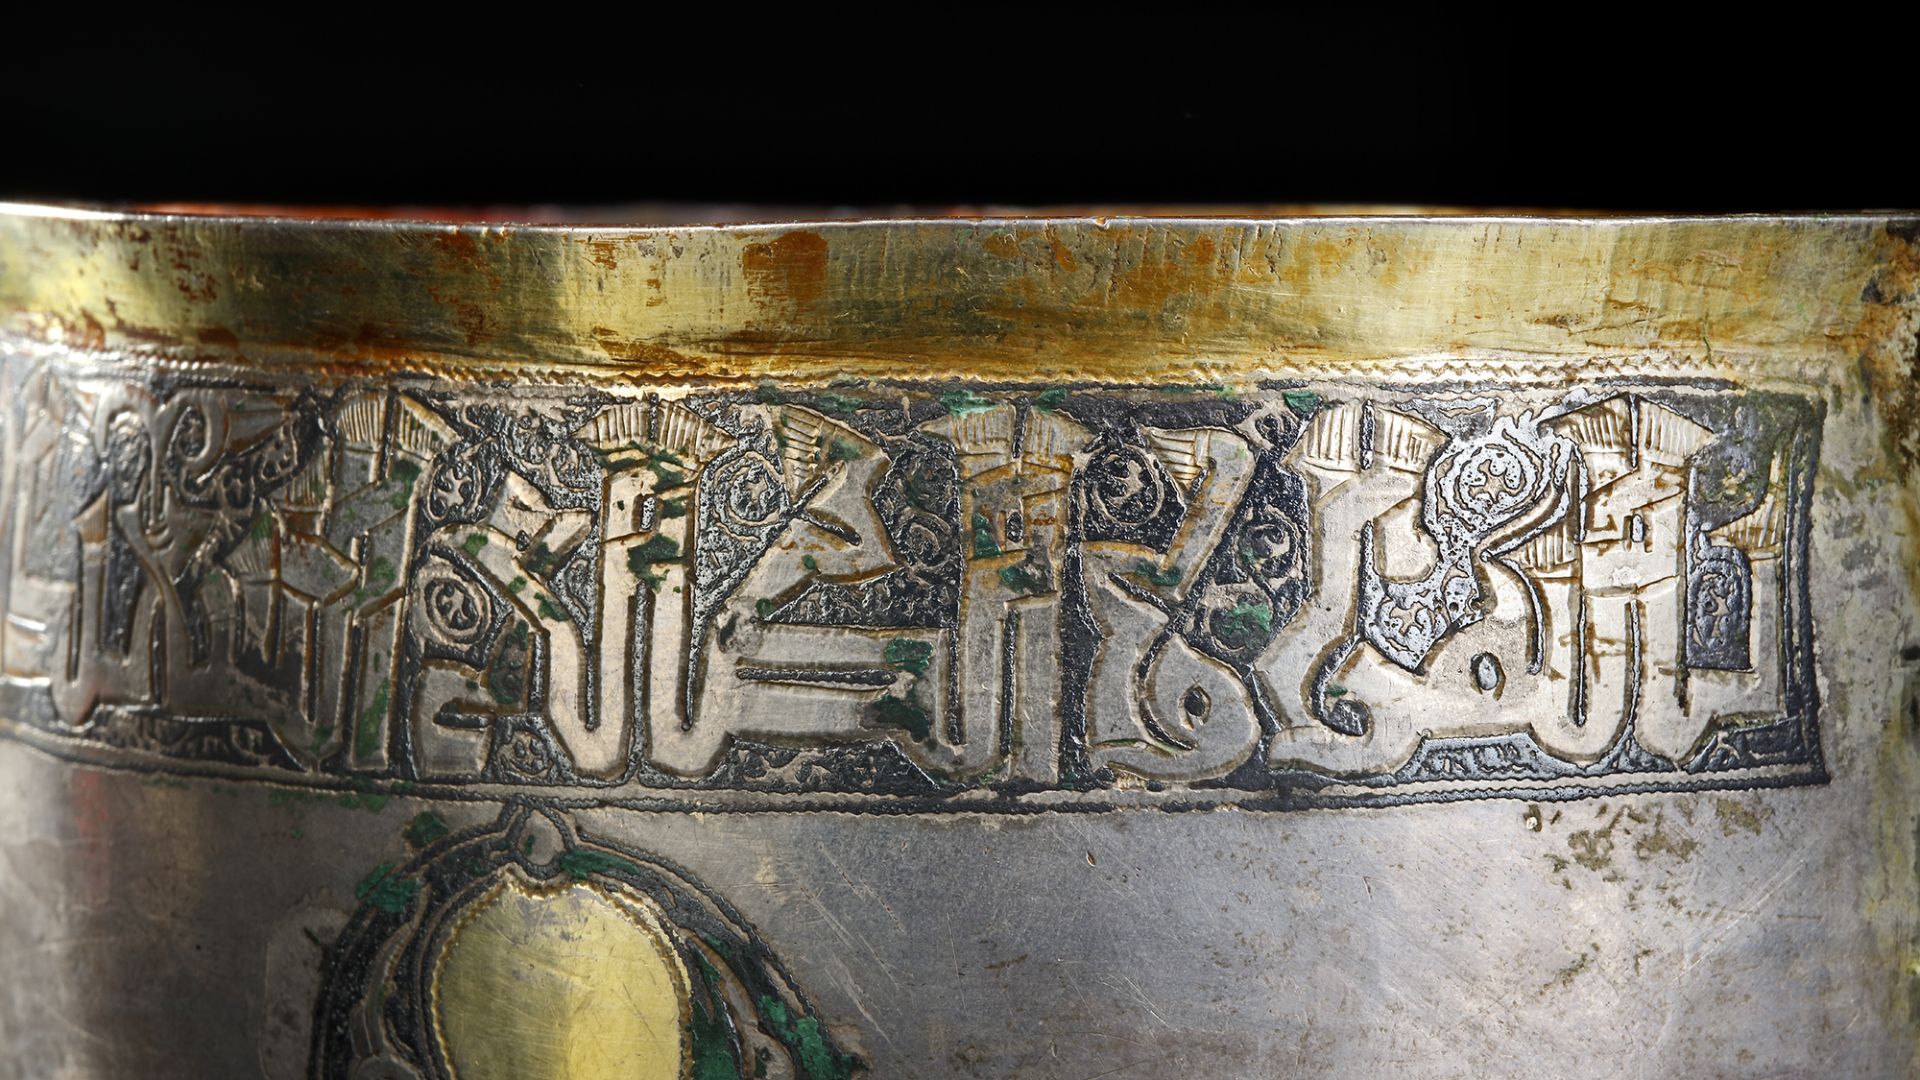 A RARE SILVER AND NIELLOED CUP WITH KUFIC INSCRIPTION, PERSIA OR CENTRAL ASIA, 11TH-12TH CENTURY - Image 23 of 34